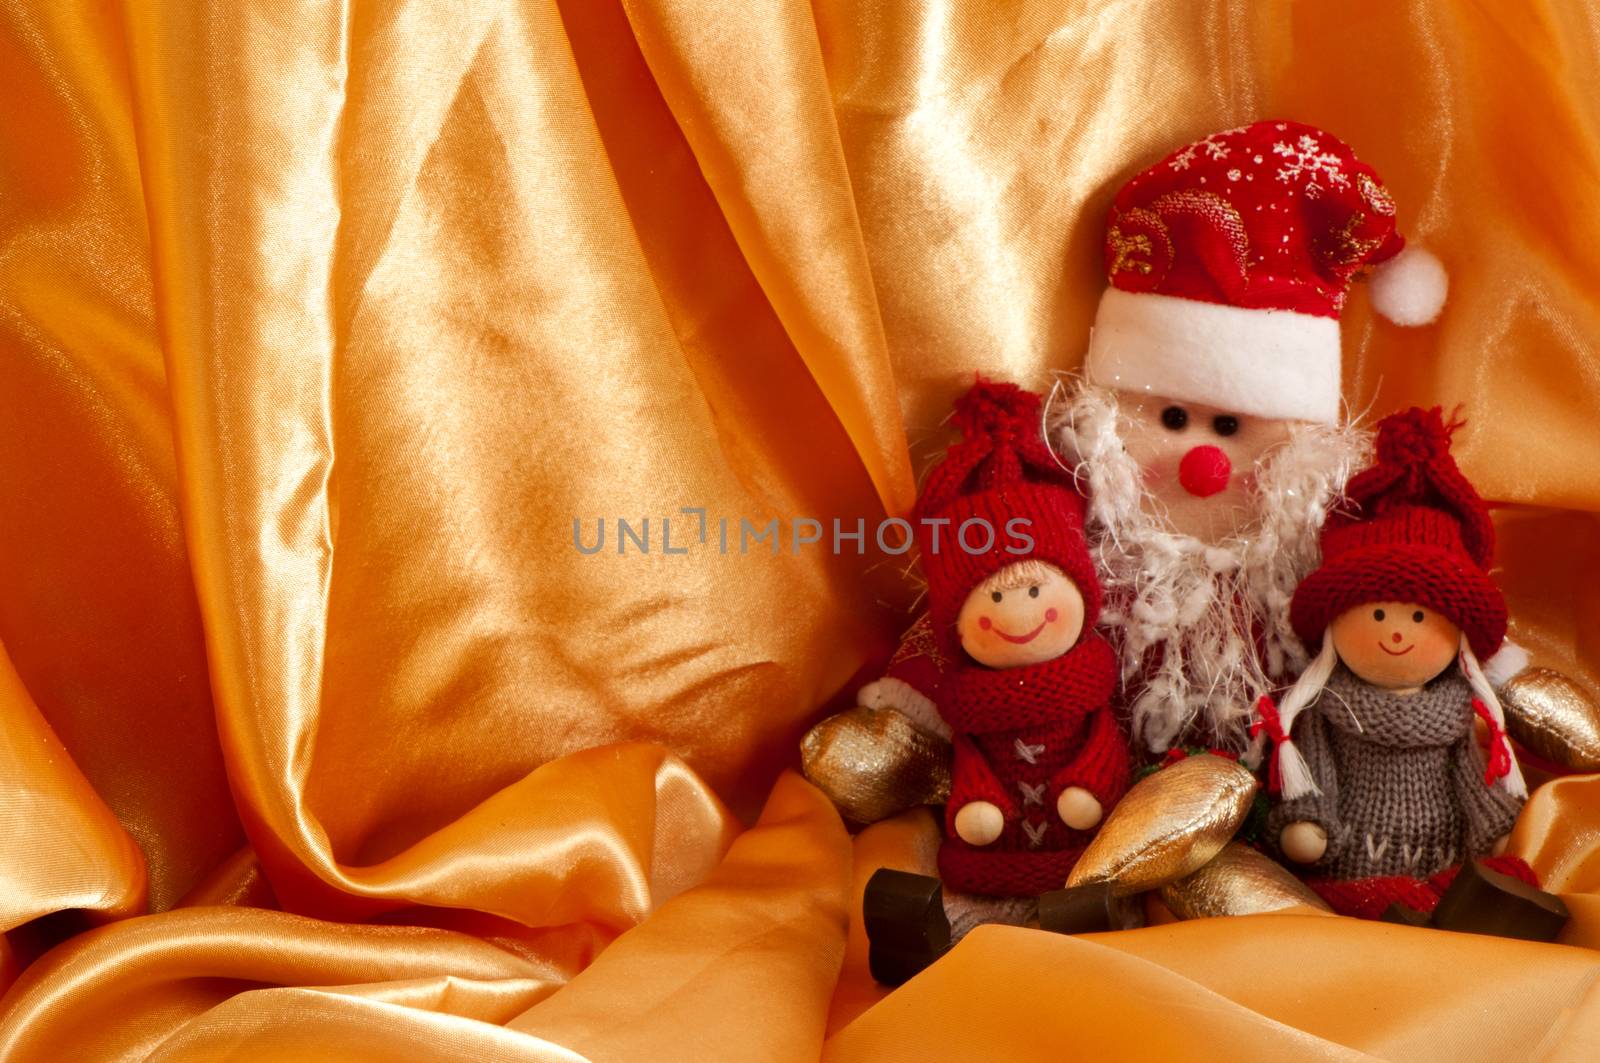 a Christmas puppets on the white background